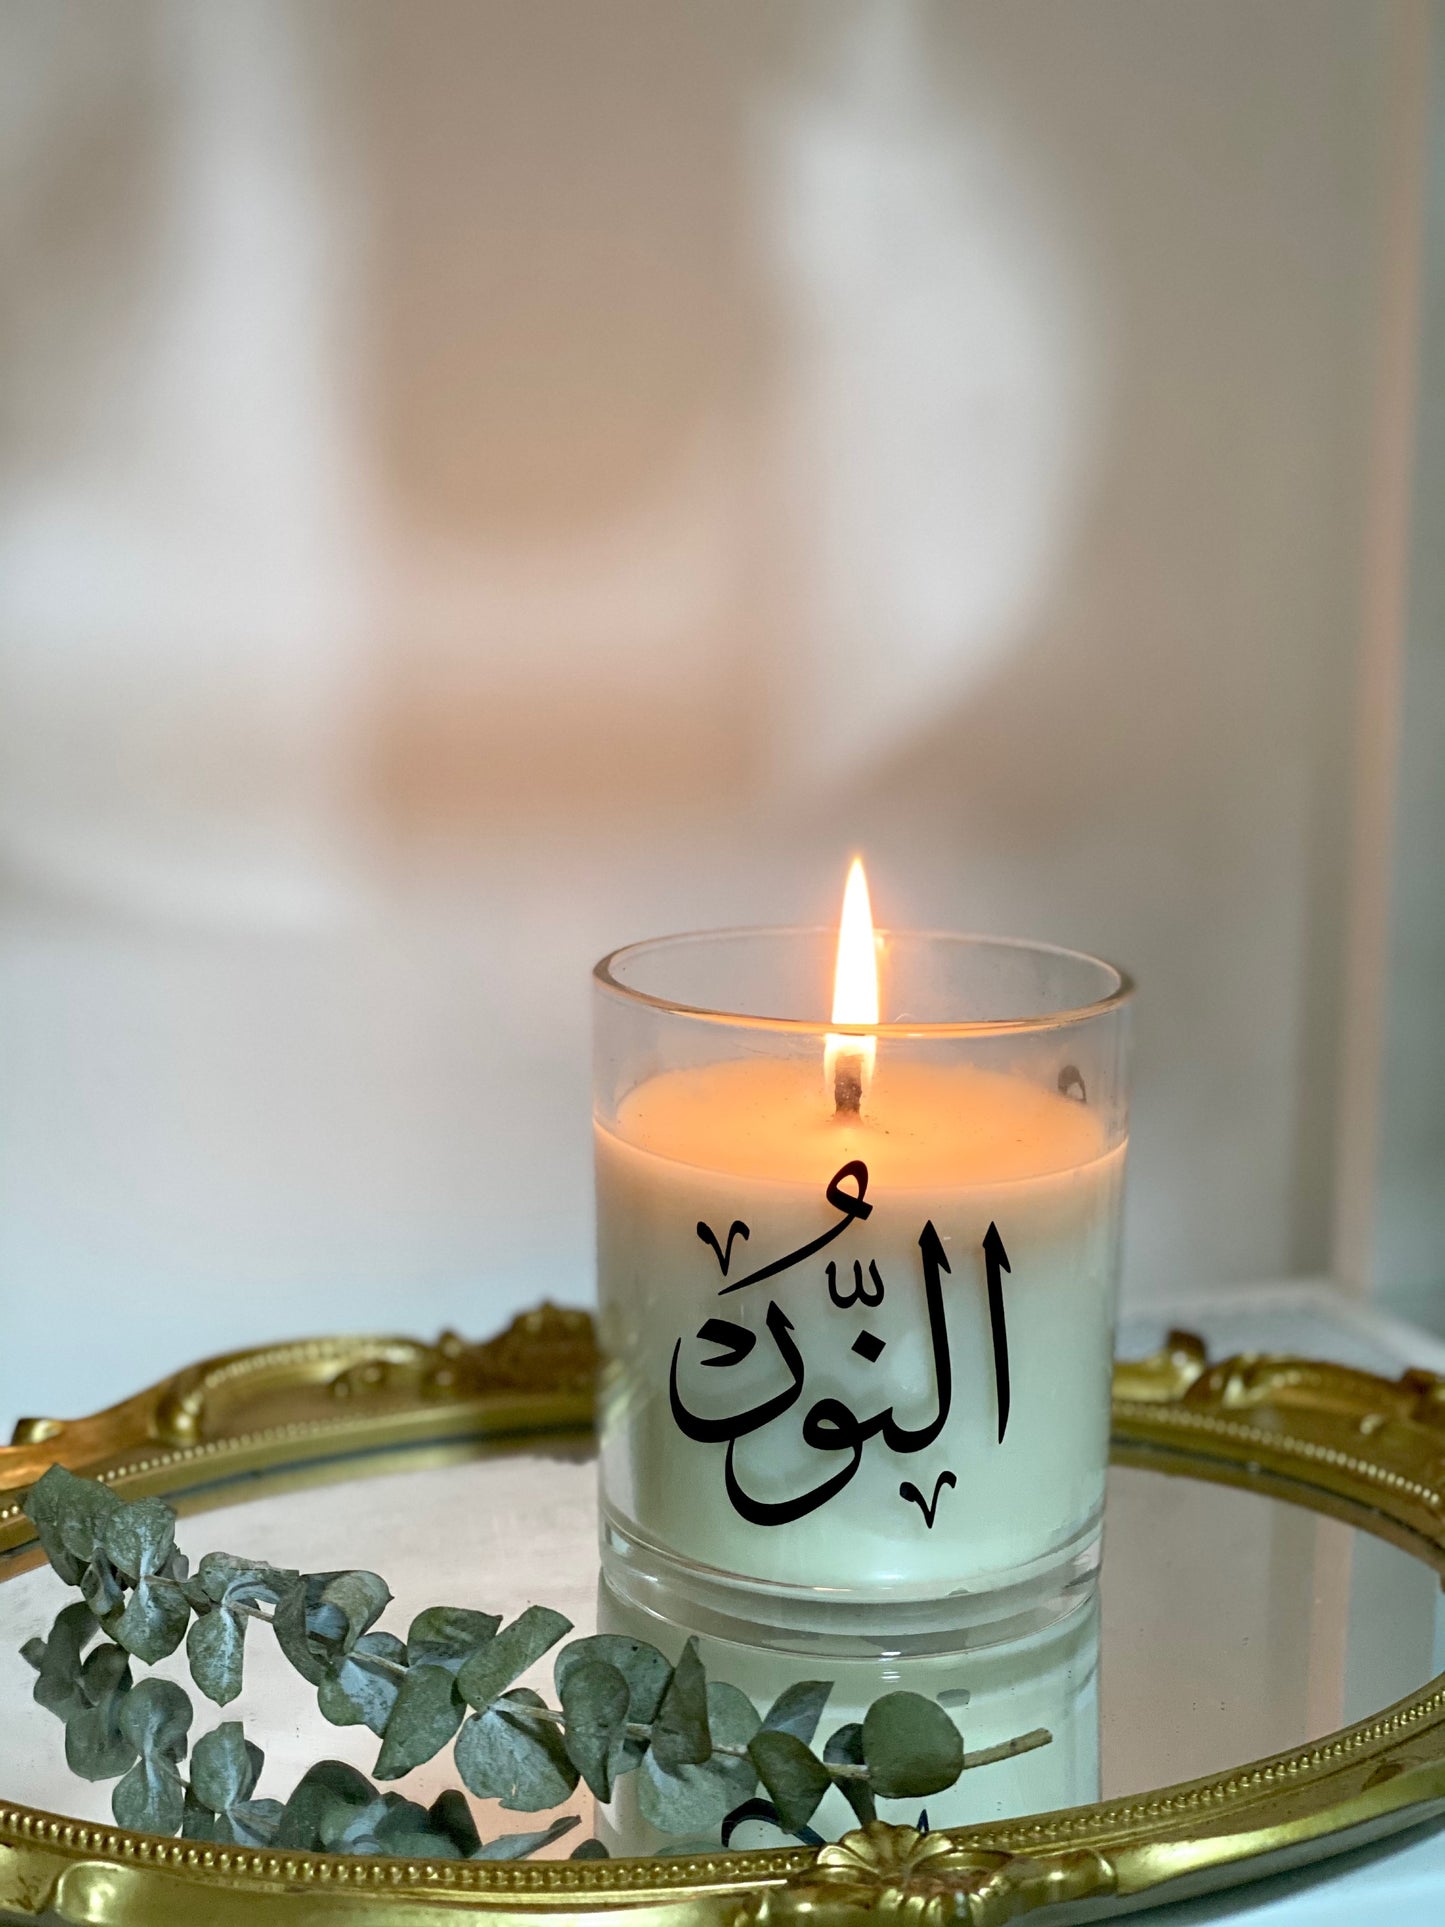 Neenor X 5LuxeScents Co. An-Nur Oud (400ml) Soy Wax Candle